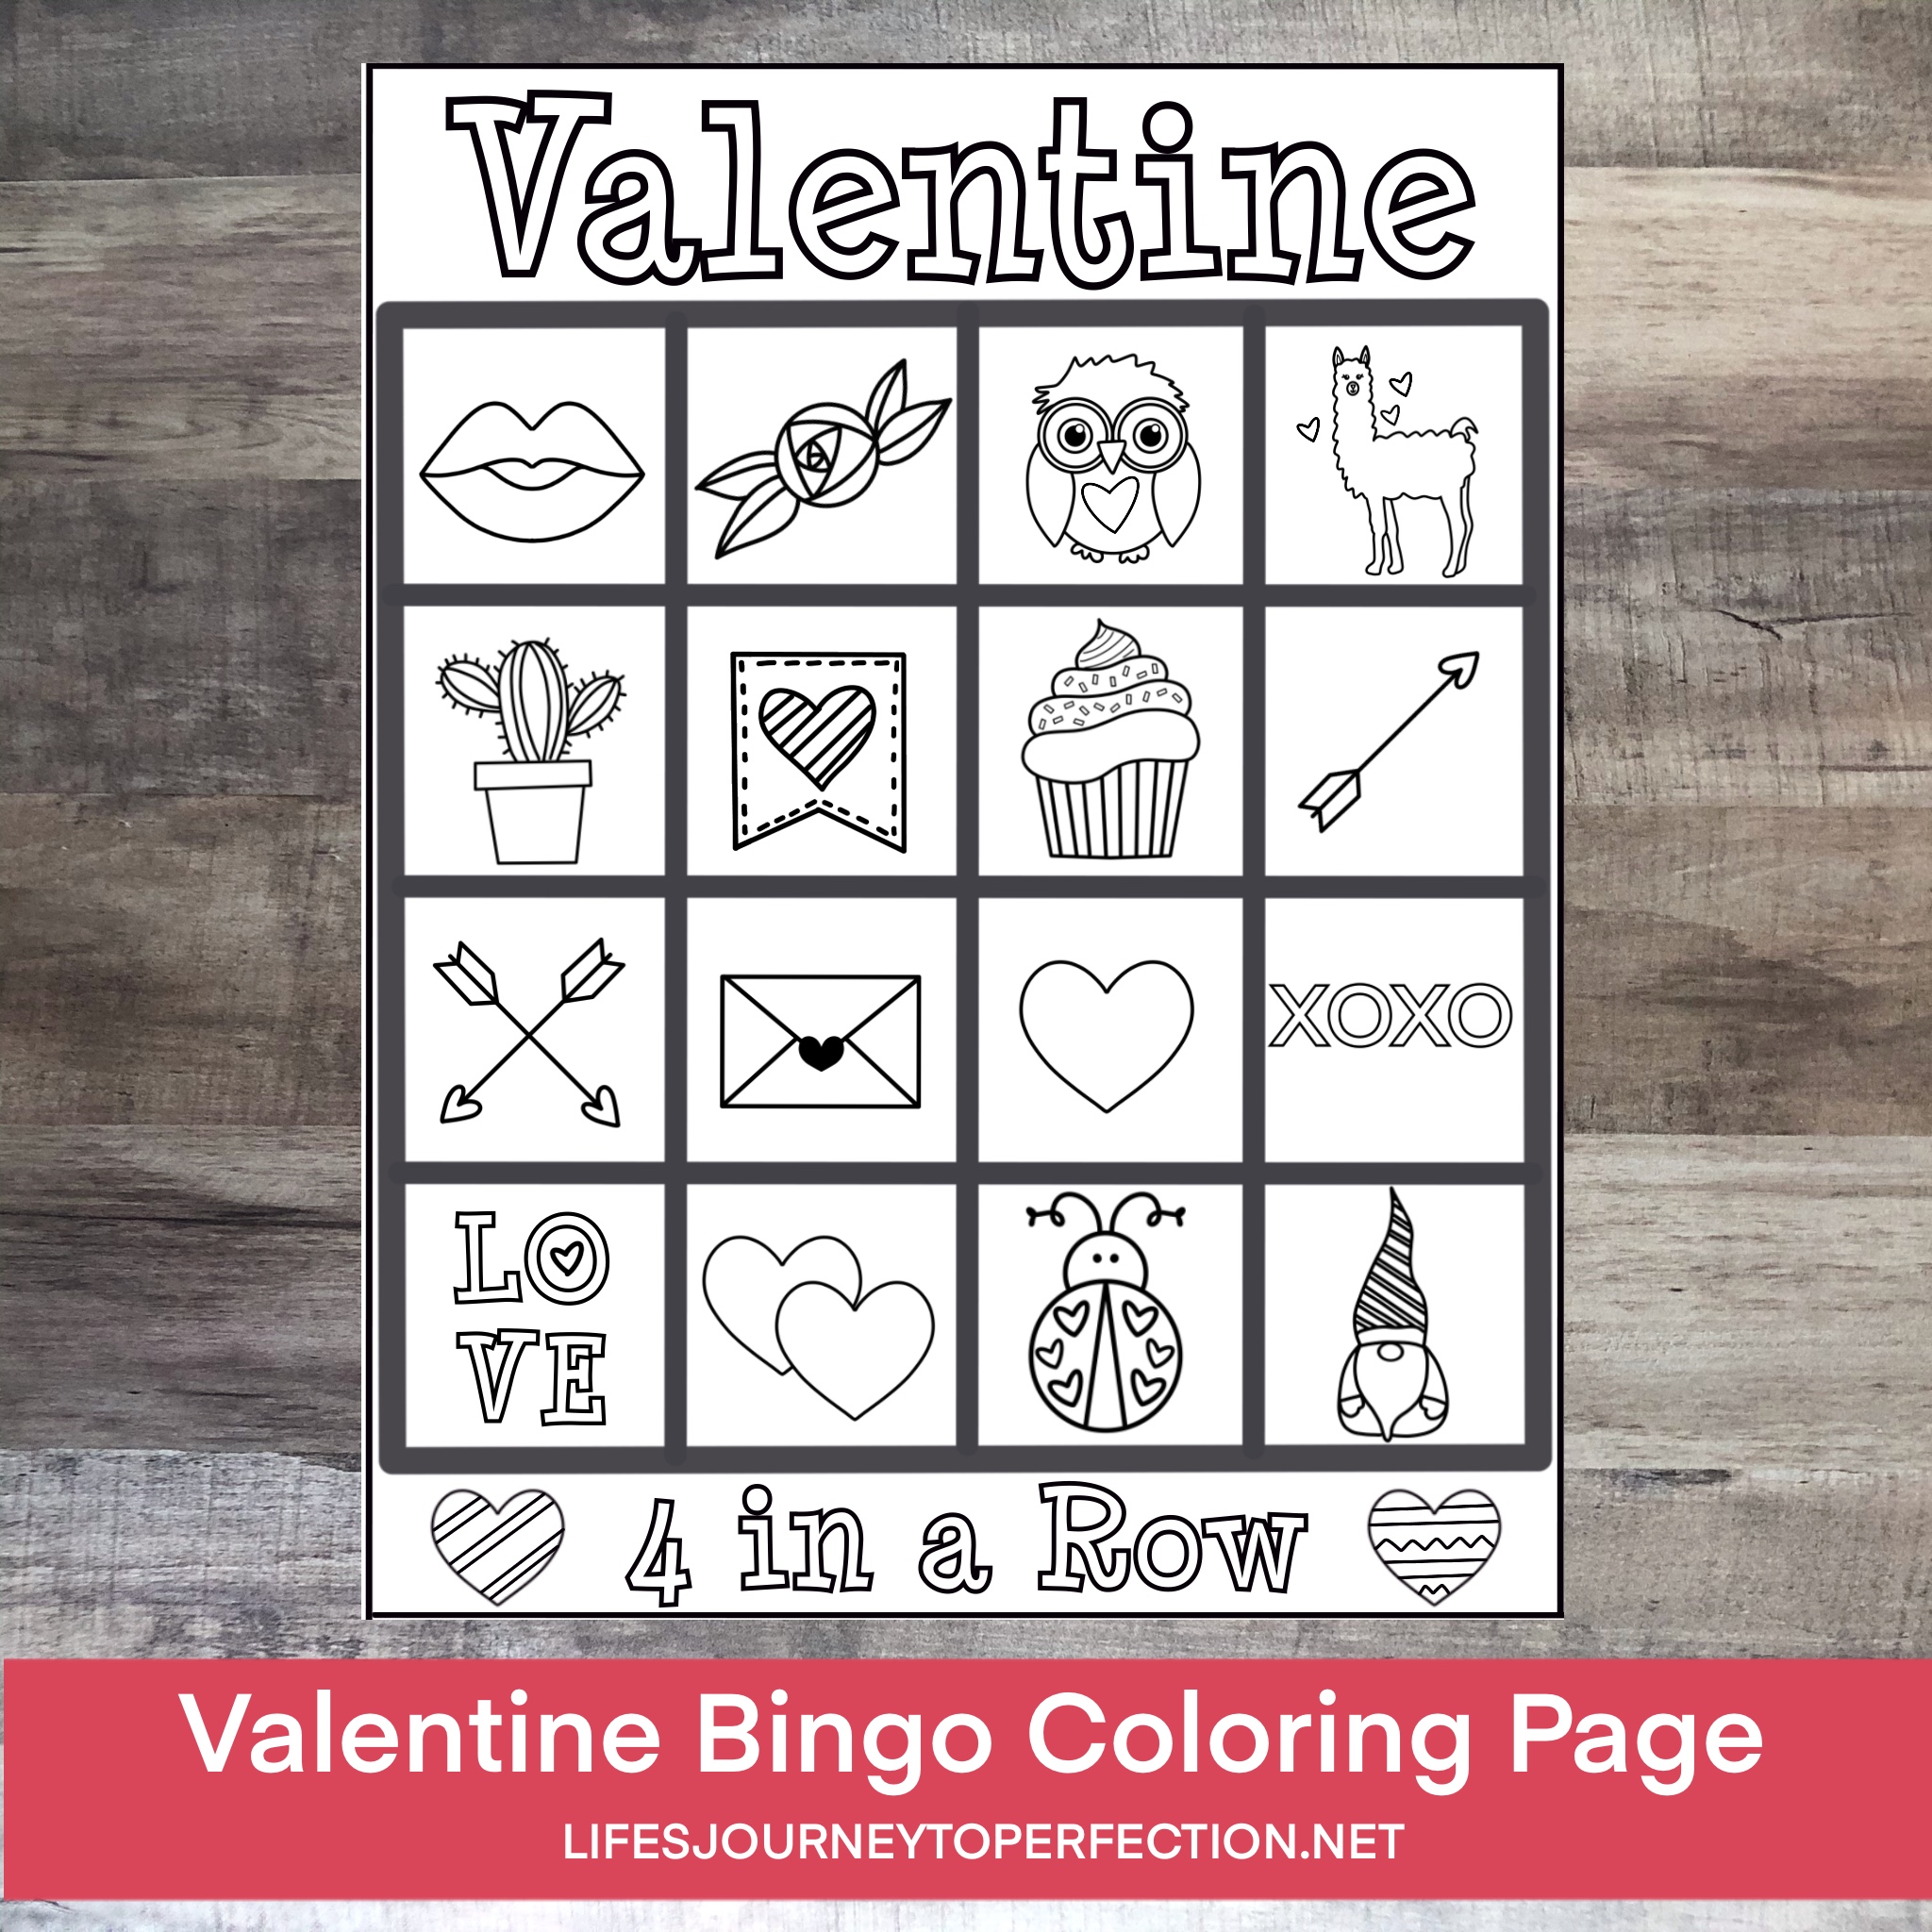 Lifes journey to perfection color and play valentine in a row bingo